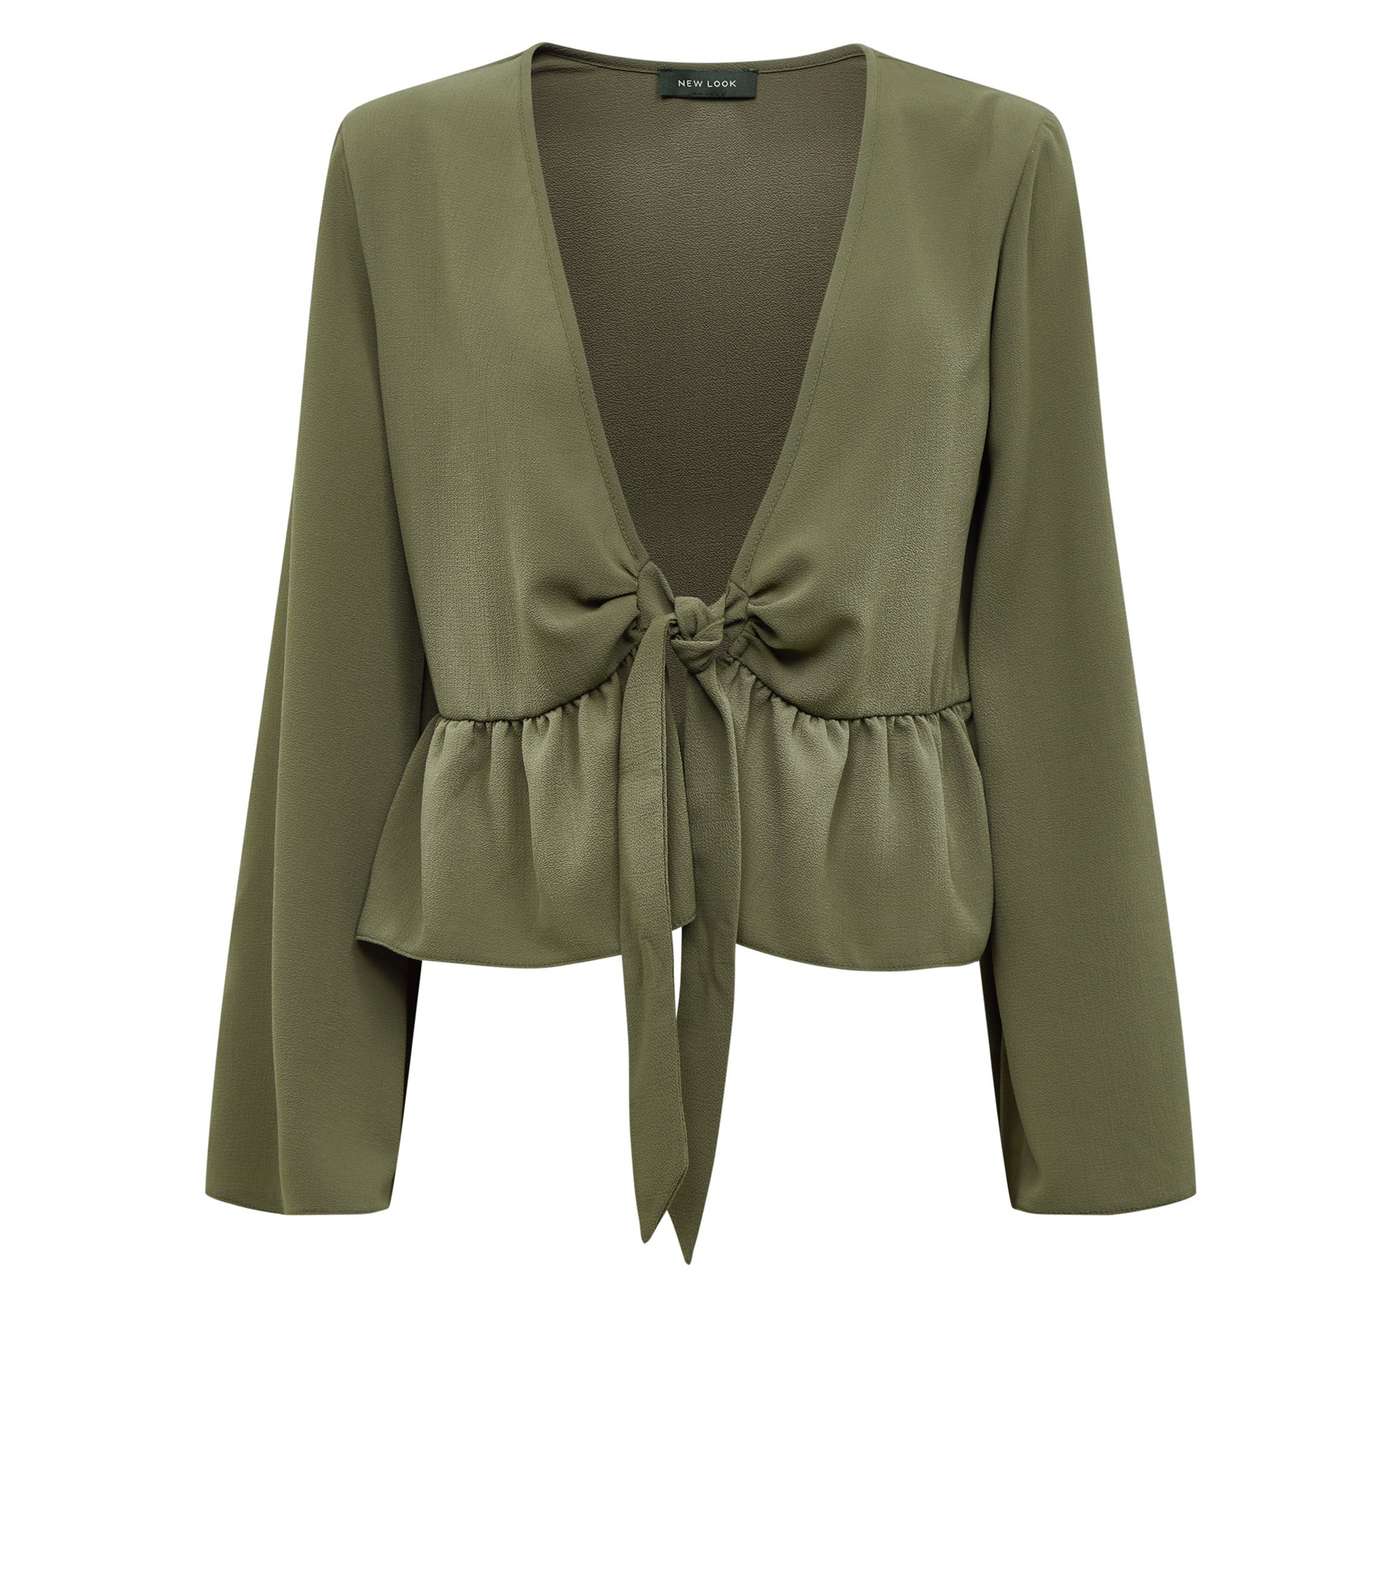 Khaki Tie Front Cover Up Image 4